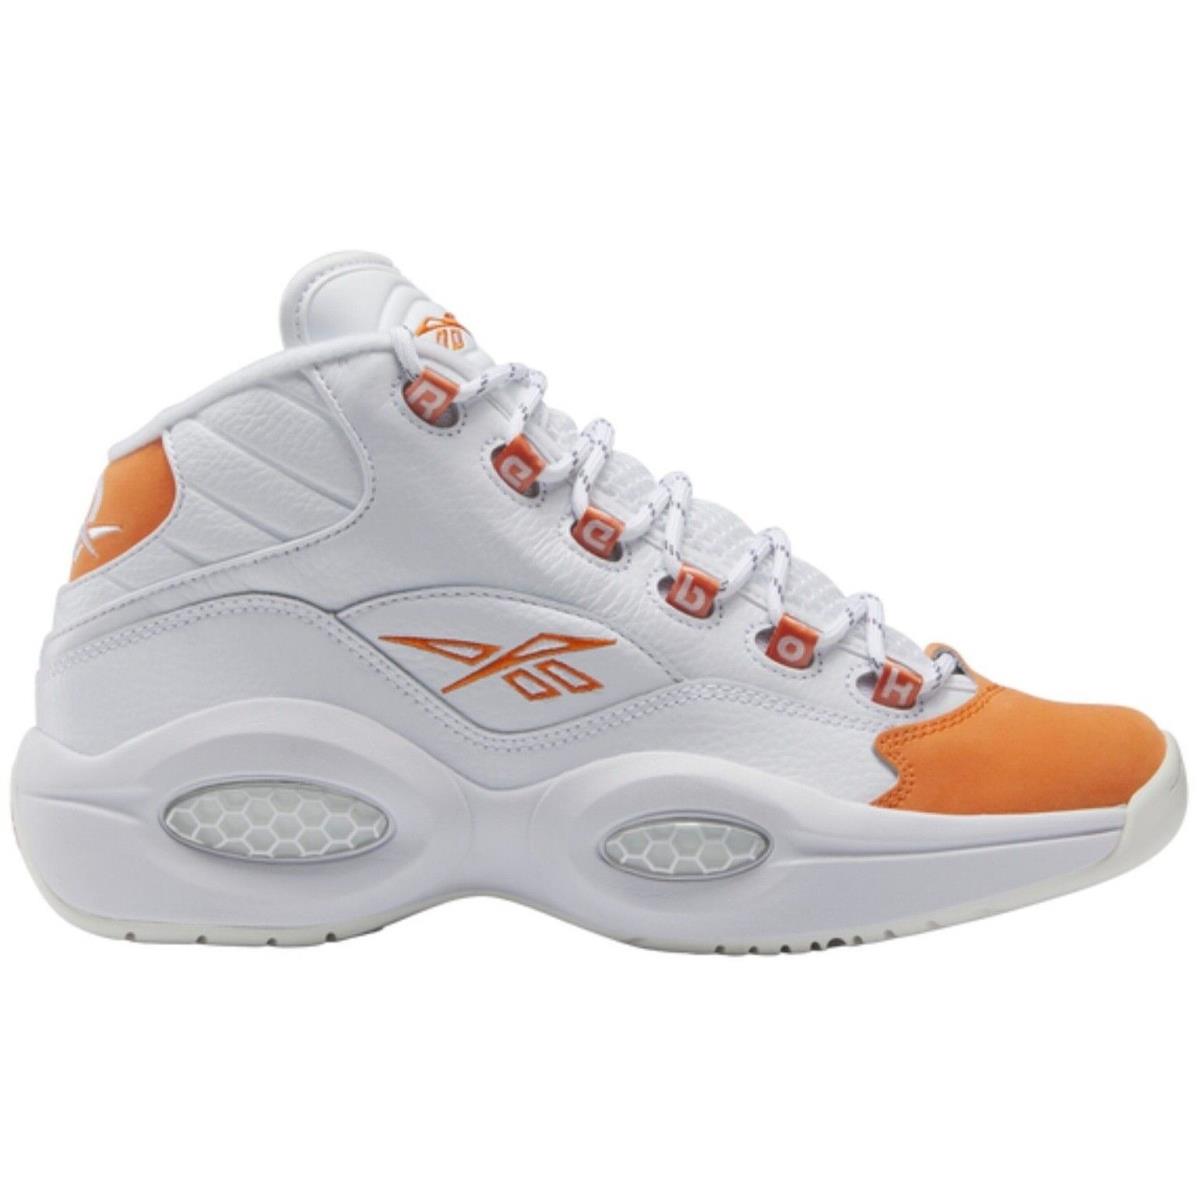 Reebok Question Mid Men`s Basketball Shoes All Colors US Sizes 7-14 White / Orange